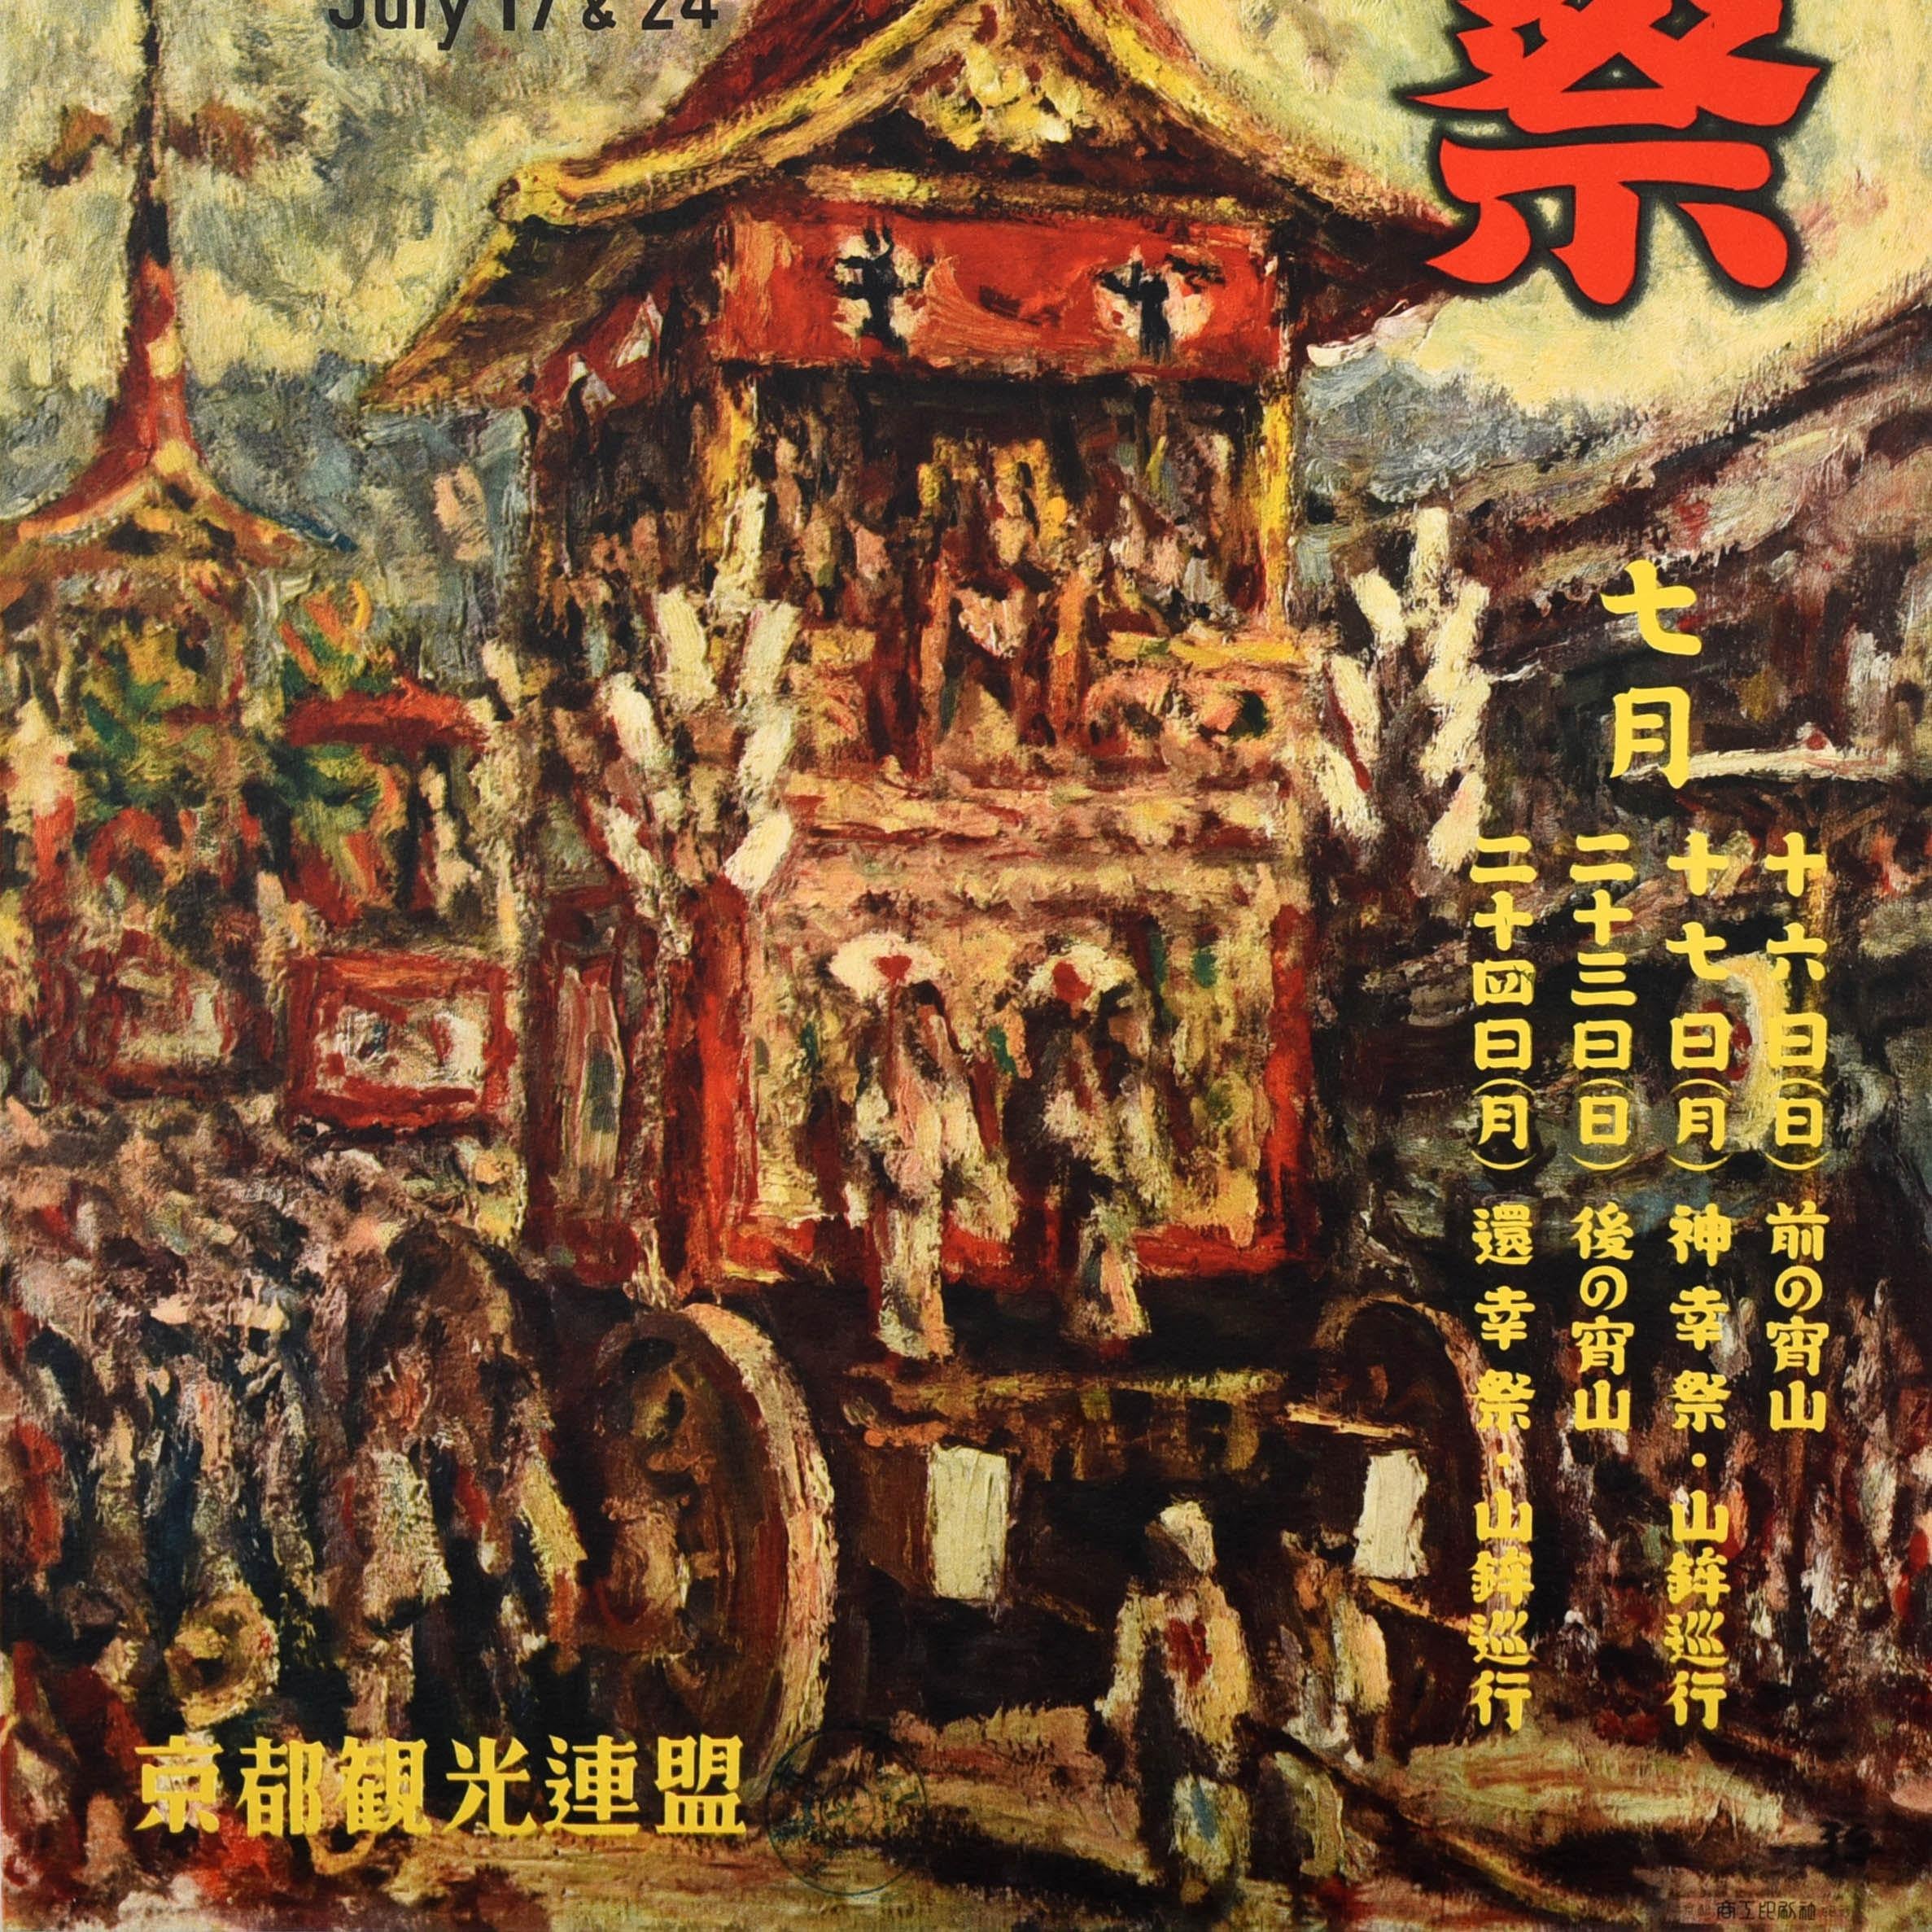 Original vintage travel poster advertising the Gion Festival Float Procession in Kyoto on 17 and 25 July featuring artwork depicting a large traditional float mounted on a wooden cart and being pulled along the road, the text in Japanese and